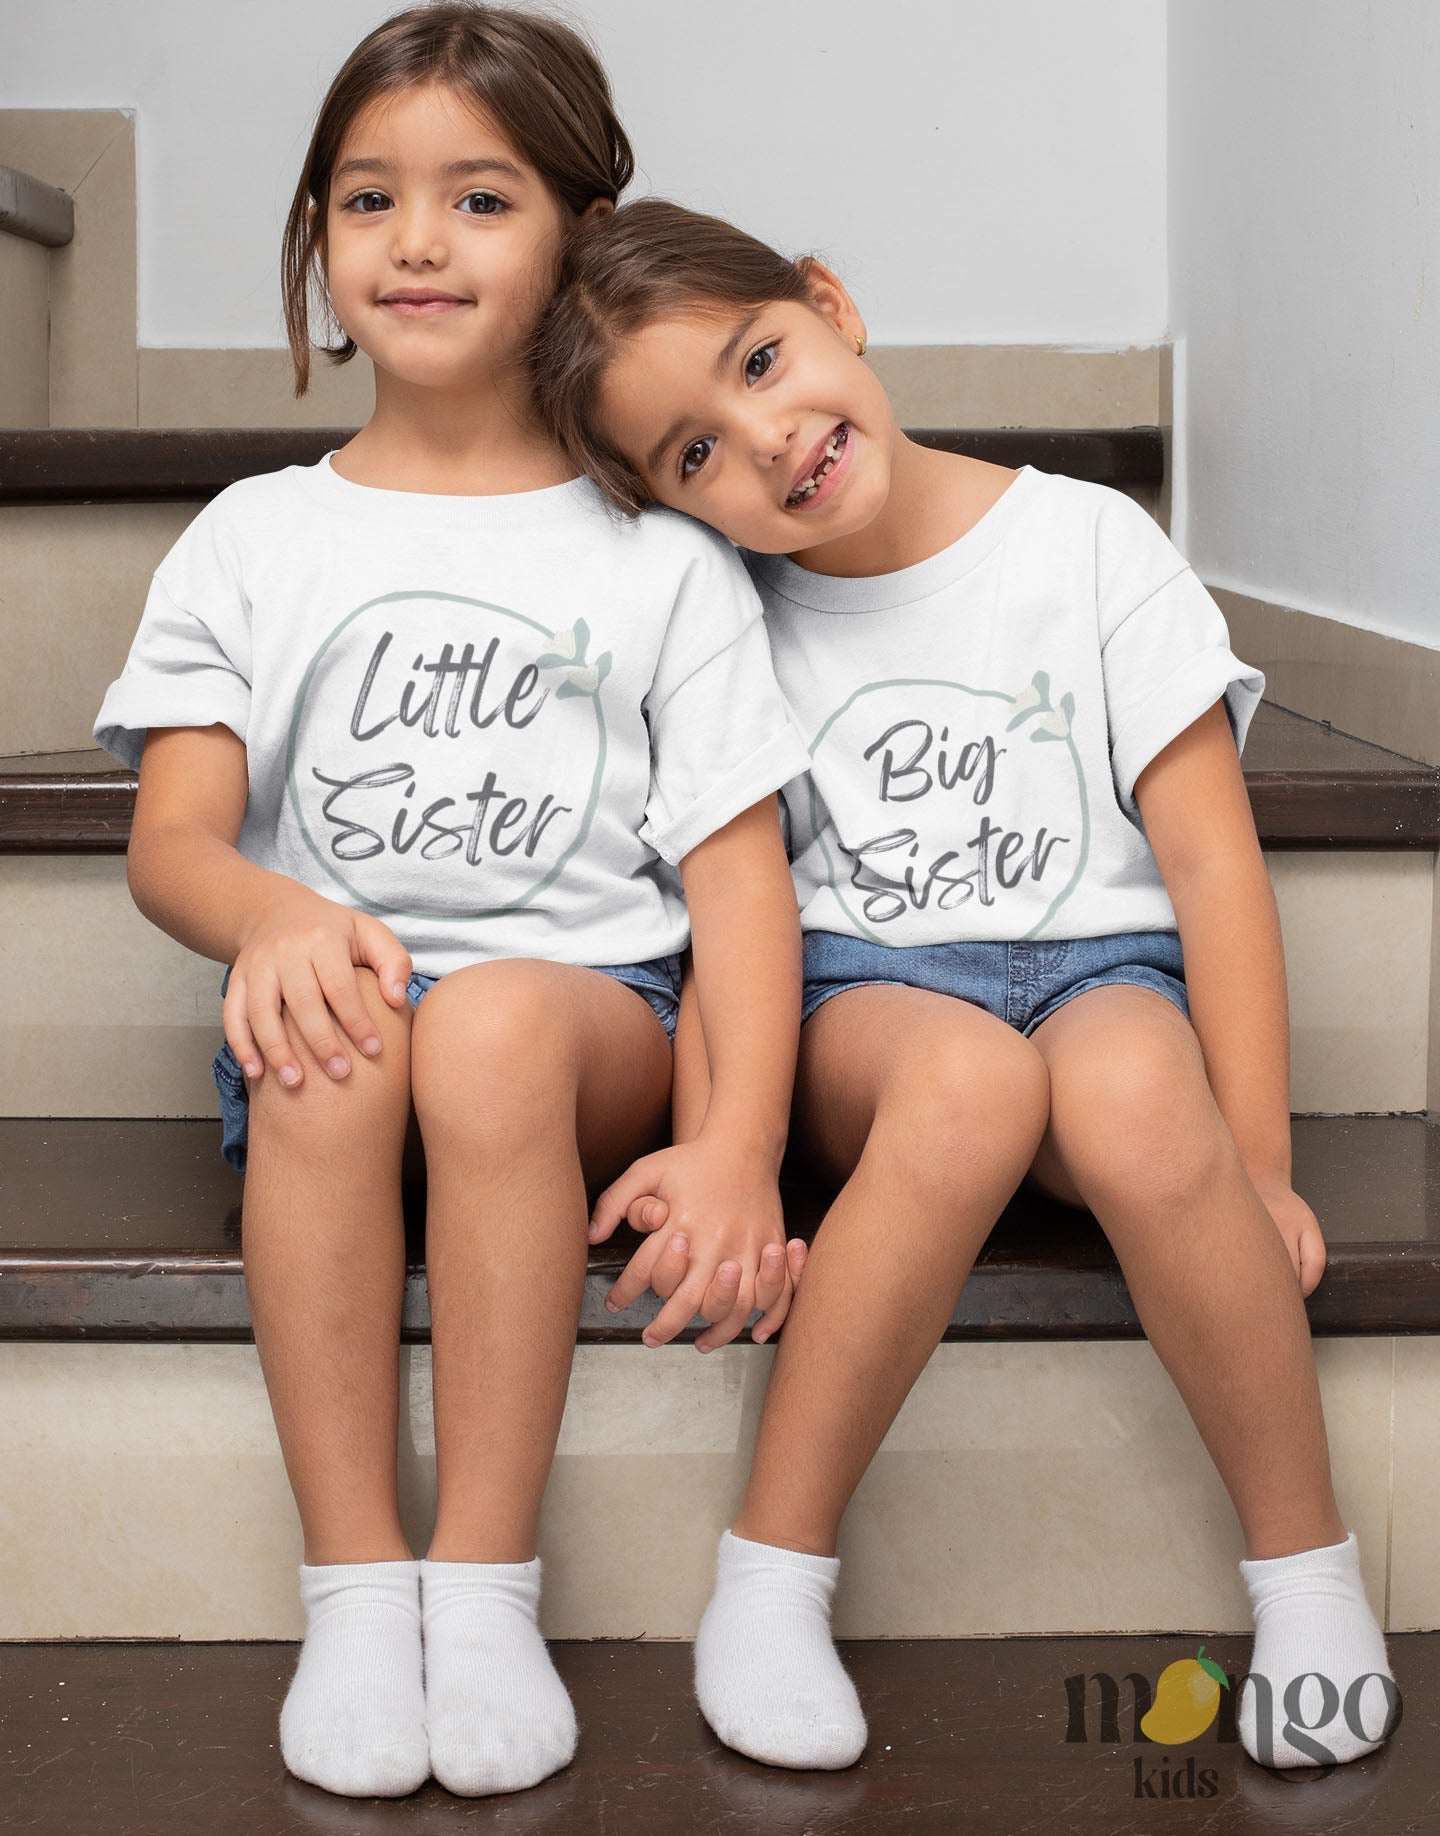 A kid's t-shirt with a minimalistic printed graphic of a pastel green floral wreath and the text 'Little Sister.' This charming t-shirt celebrates the joyous arrival of a little sister.